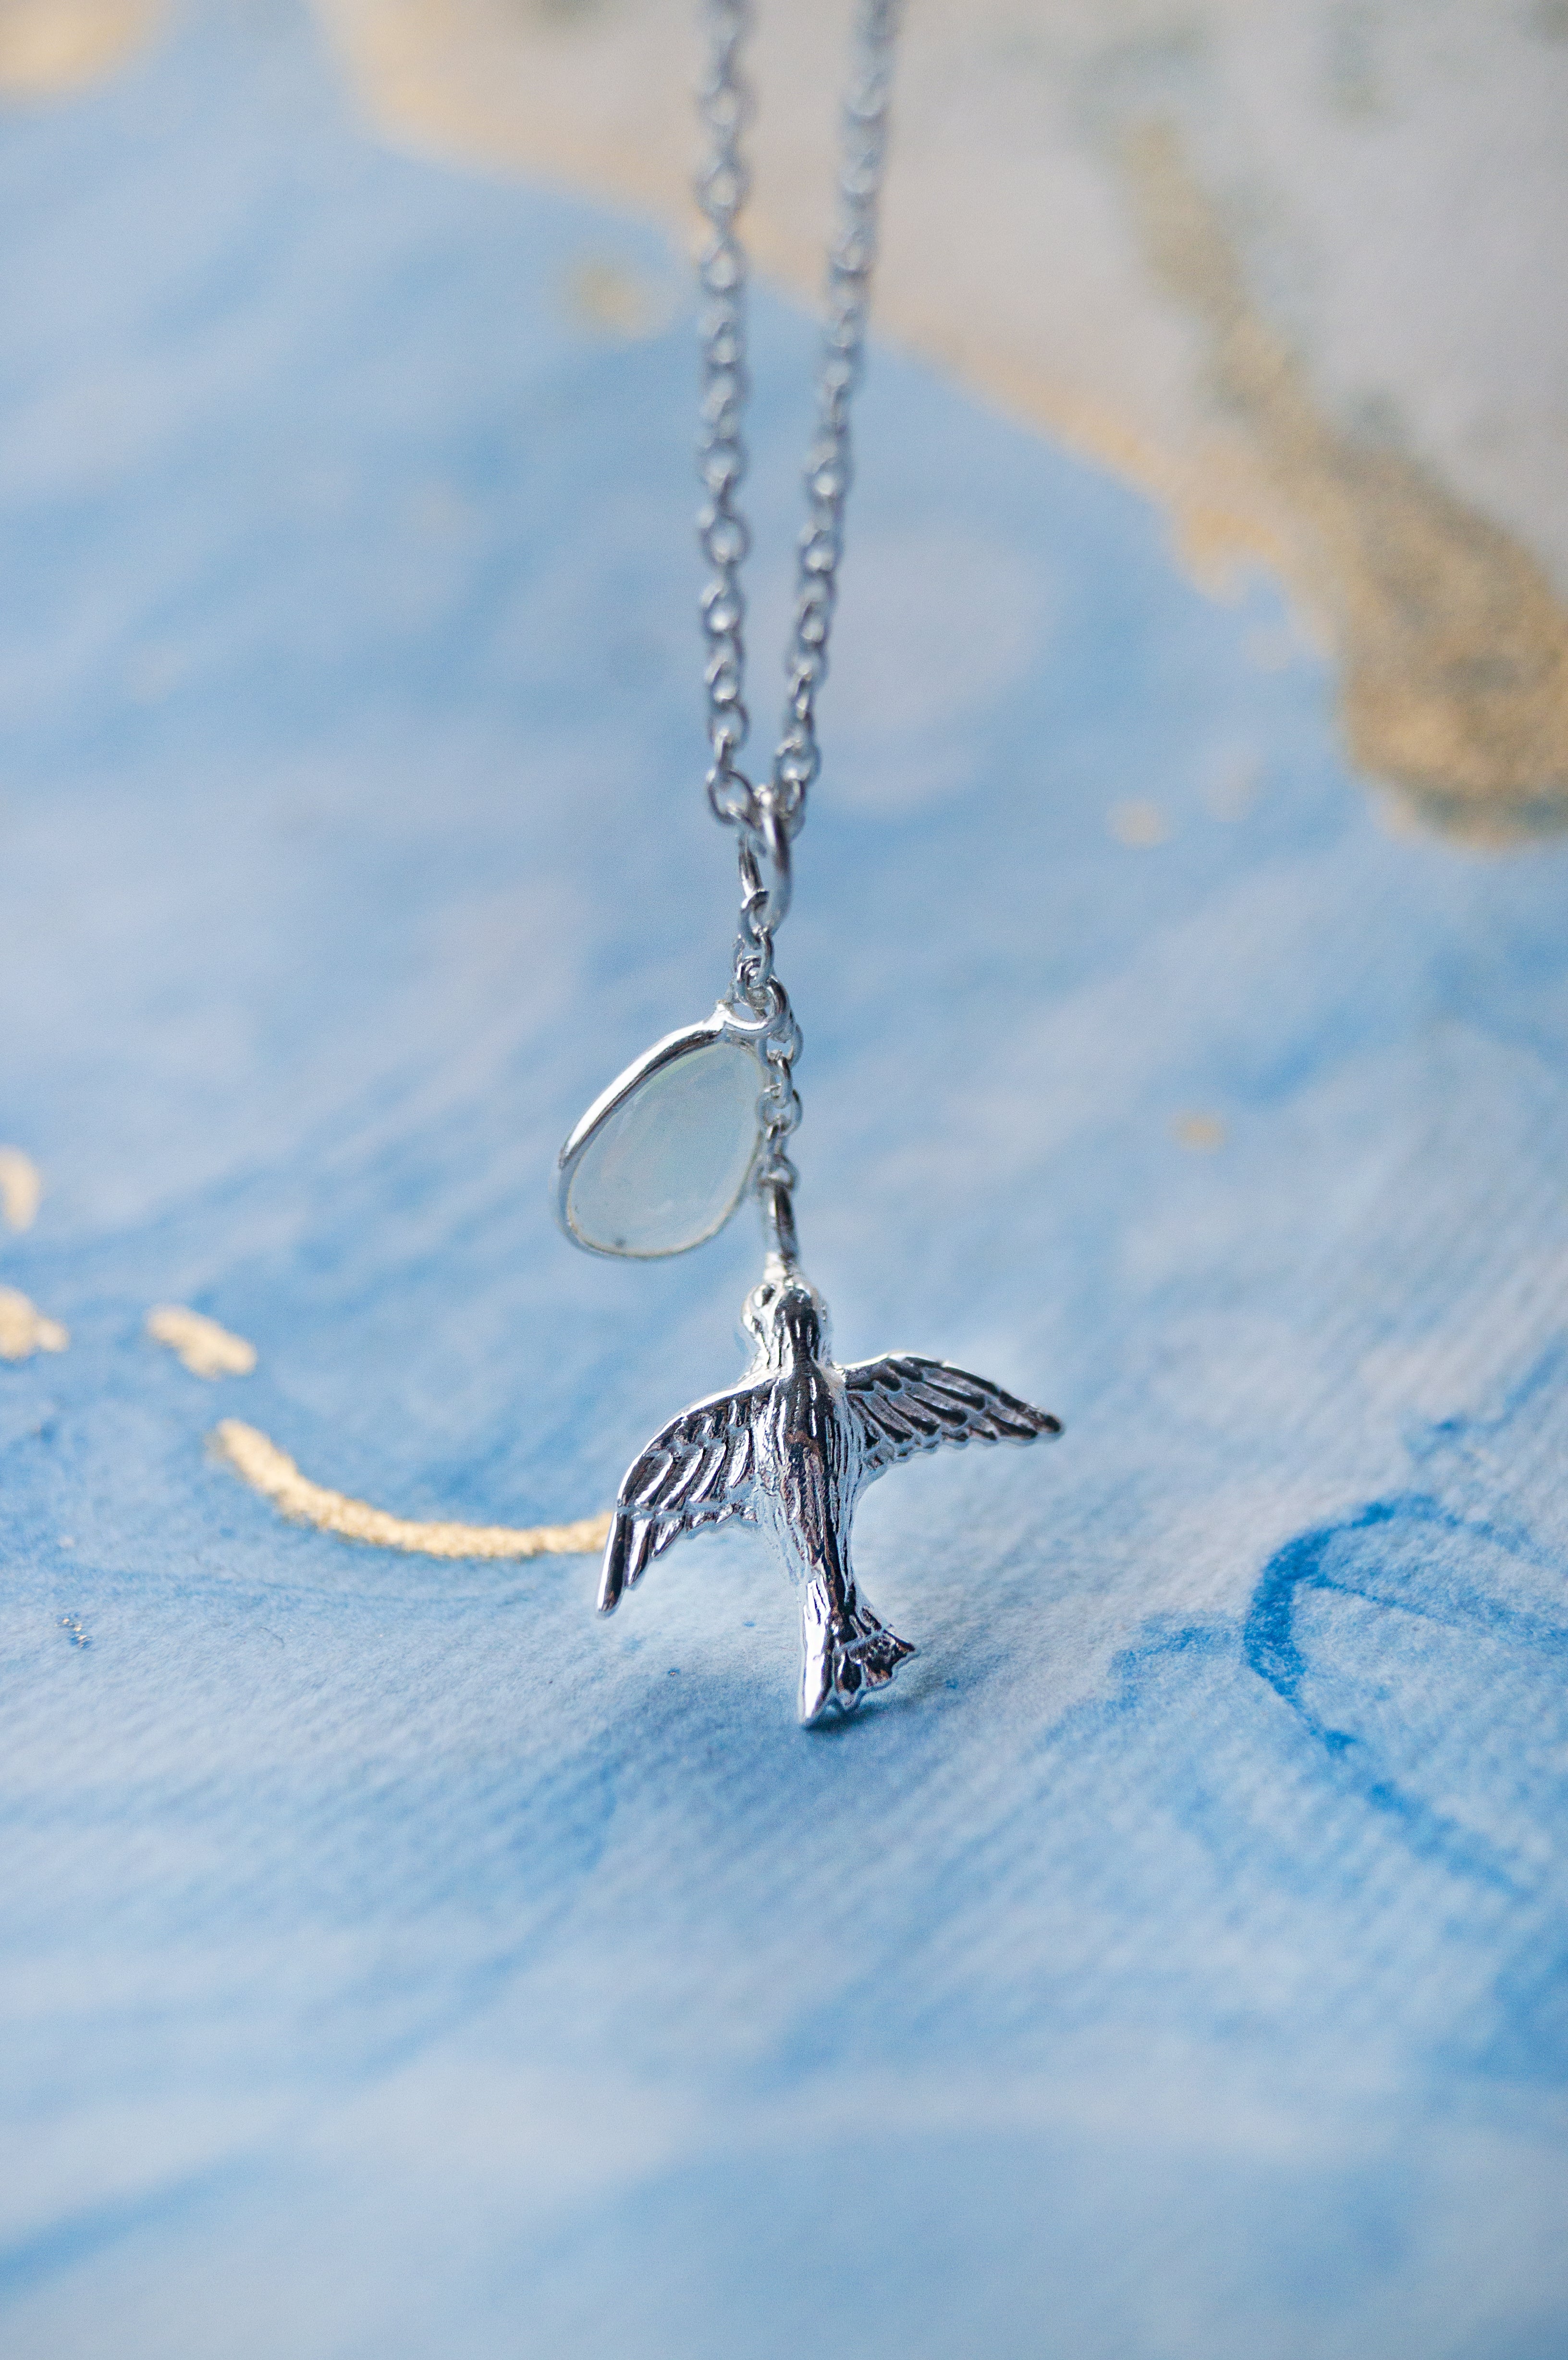 Flying Bird Necklace, Gold / Silver Dainty Small Bird Charm Necklace,  Jewelry Gift for Her, by Balance9 - Etsy